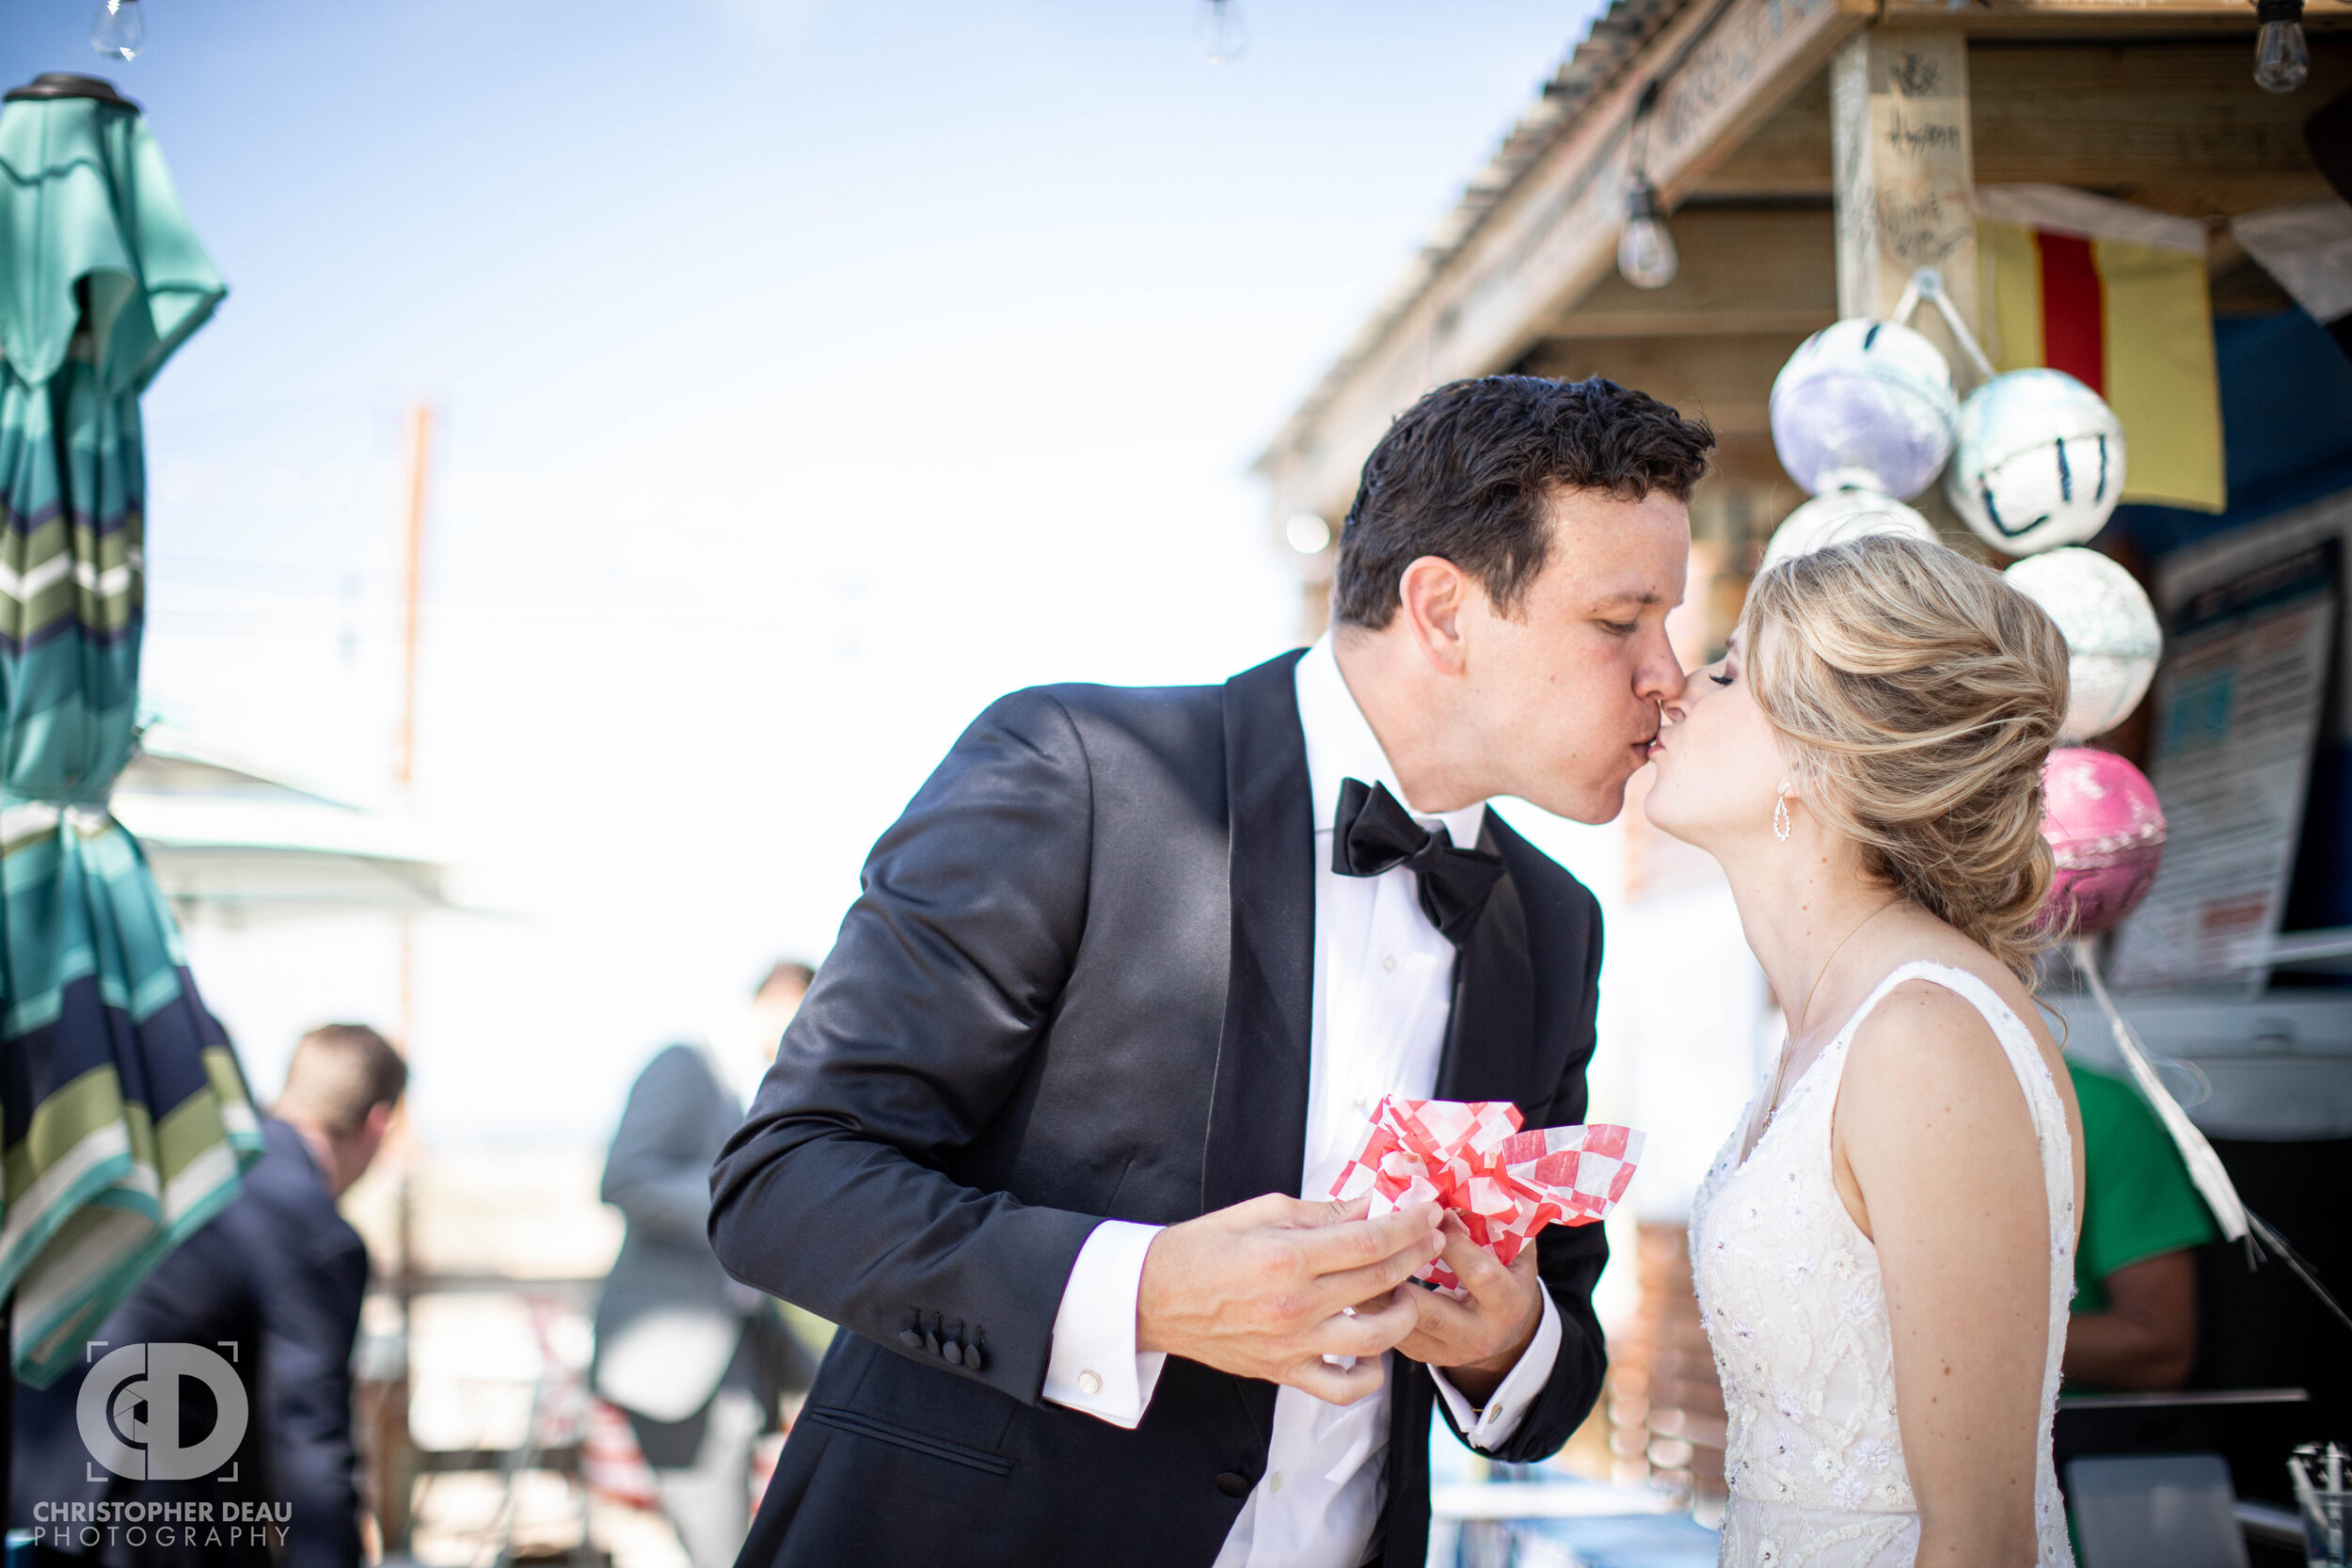  bride and groom find a hotdog stand at the beach and stop for a quick snack 